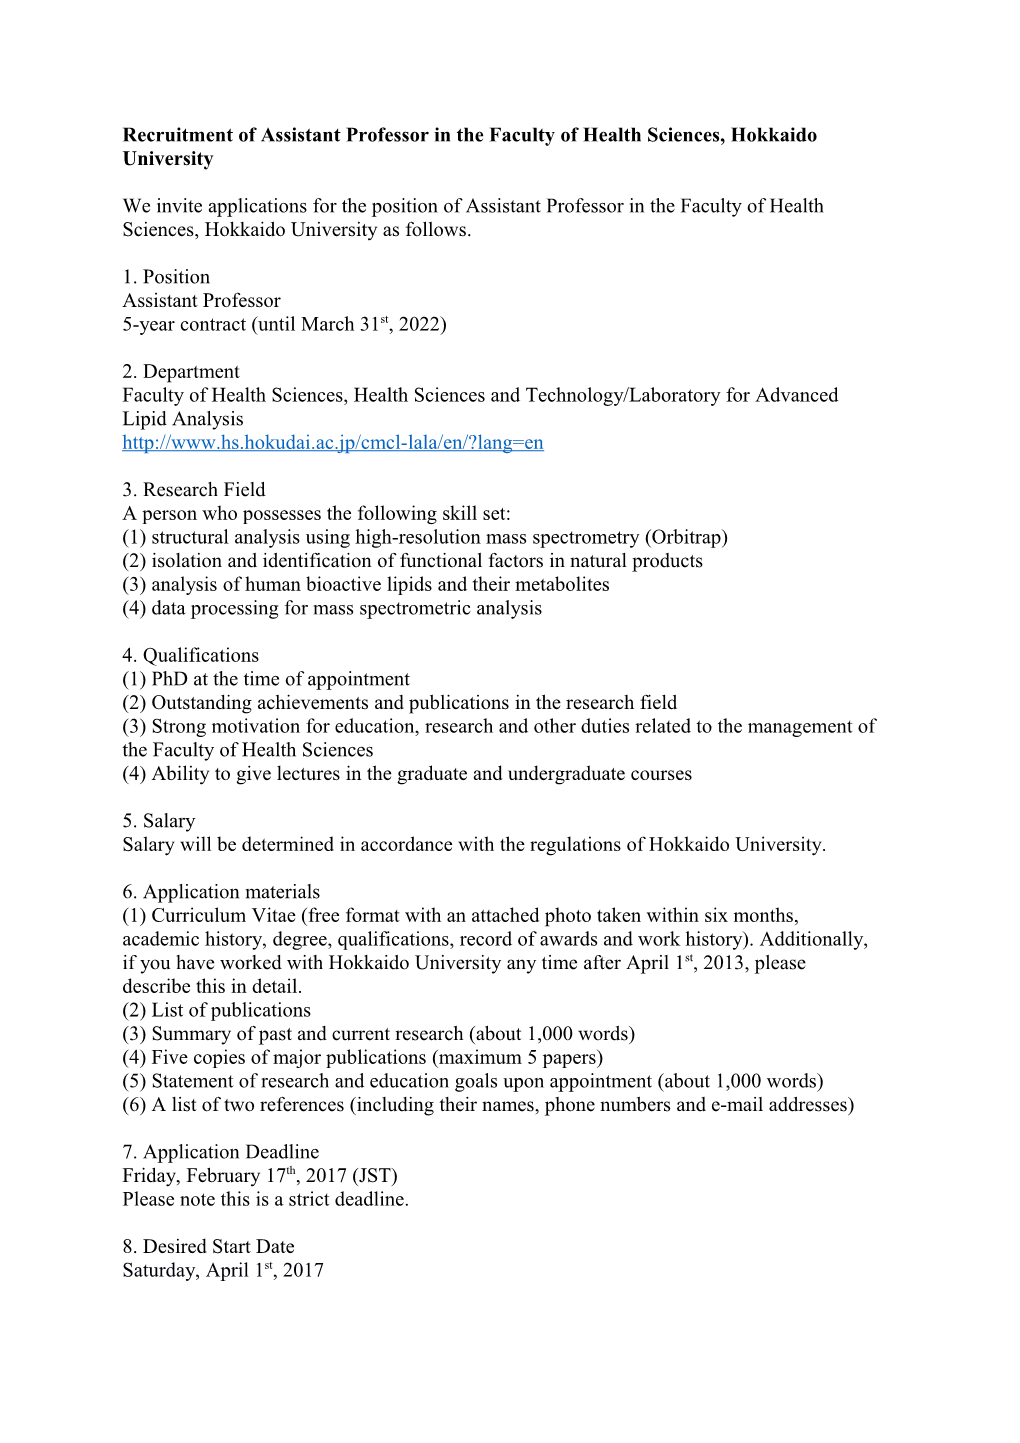 Recruitment of Assistant Professor in the Faculty of Health Sciences,Hokkaido University